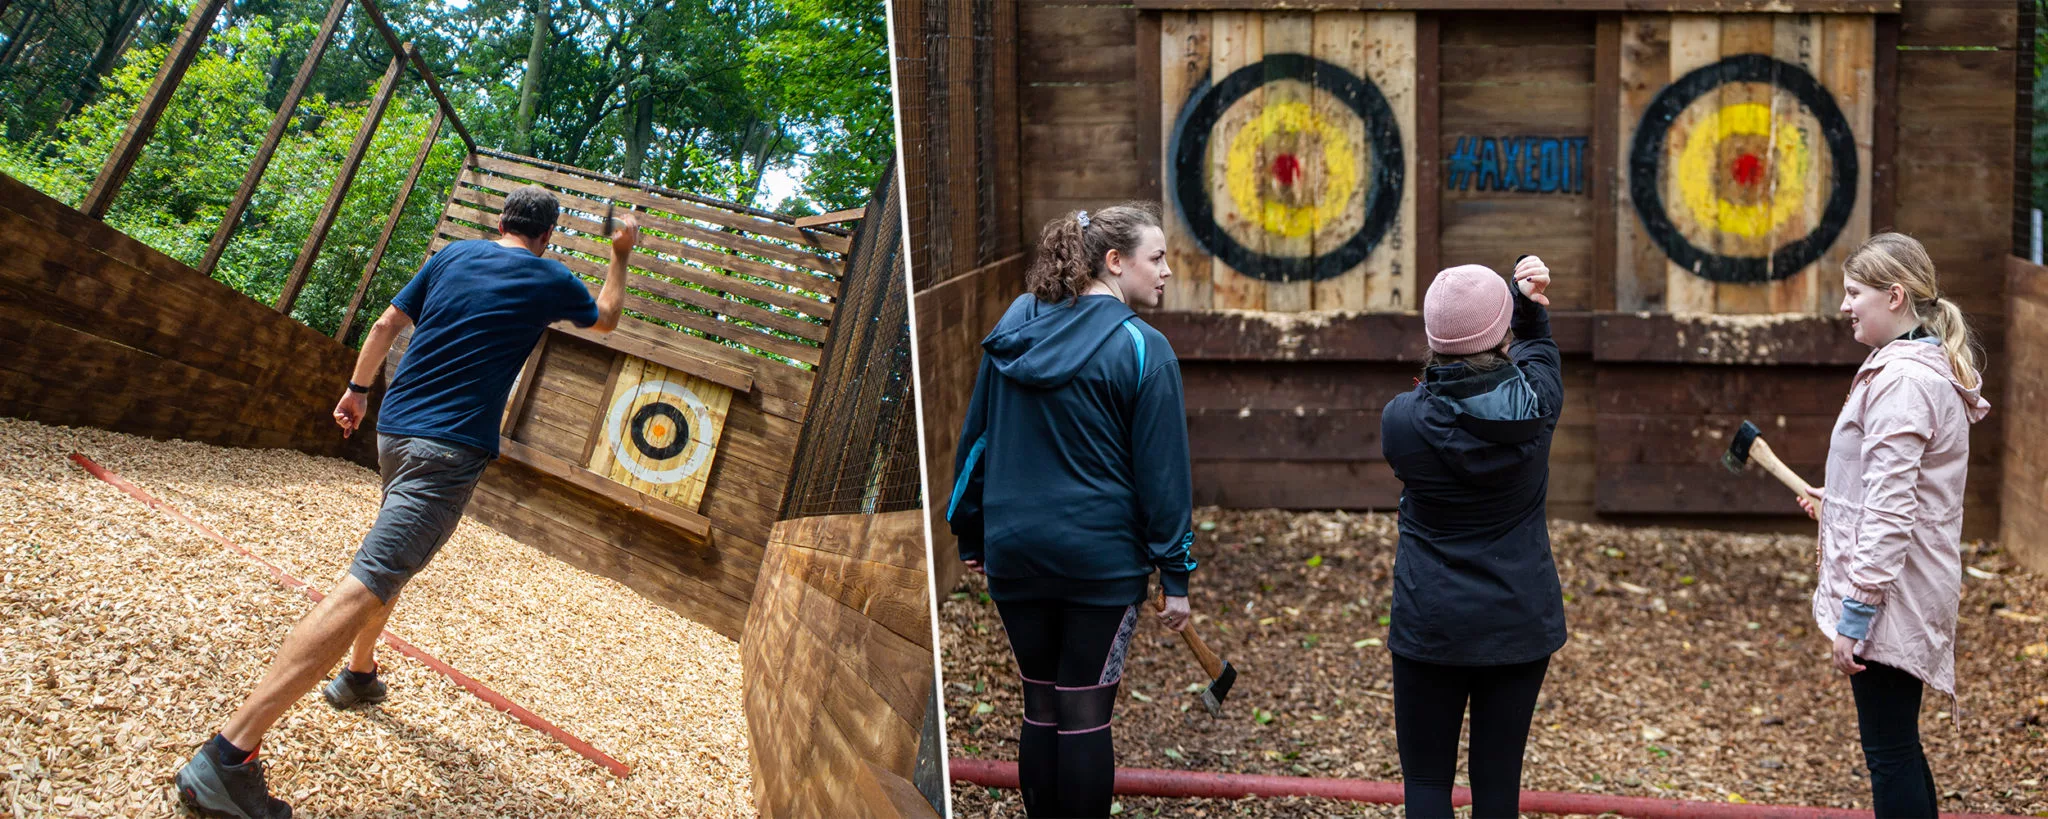 People throwing axes at targets